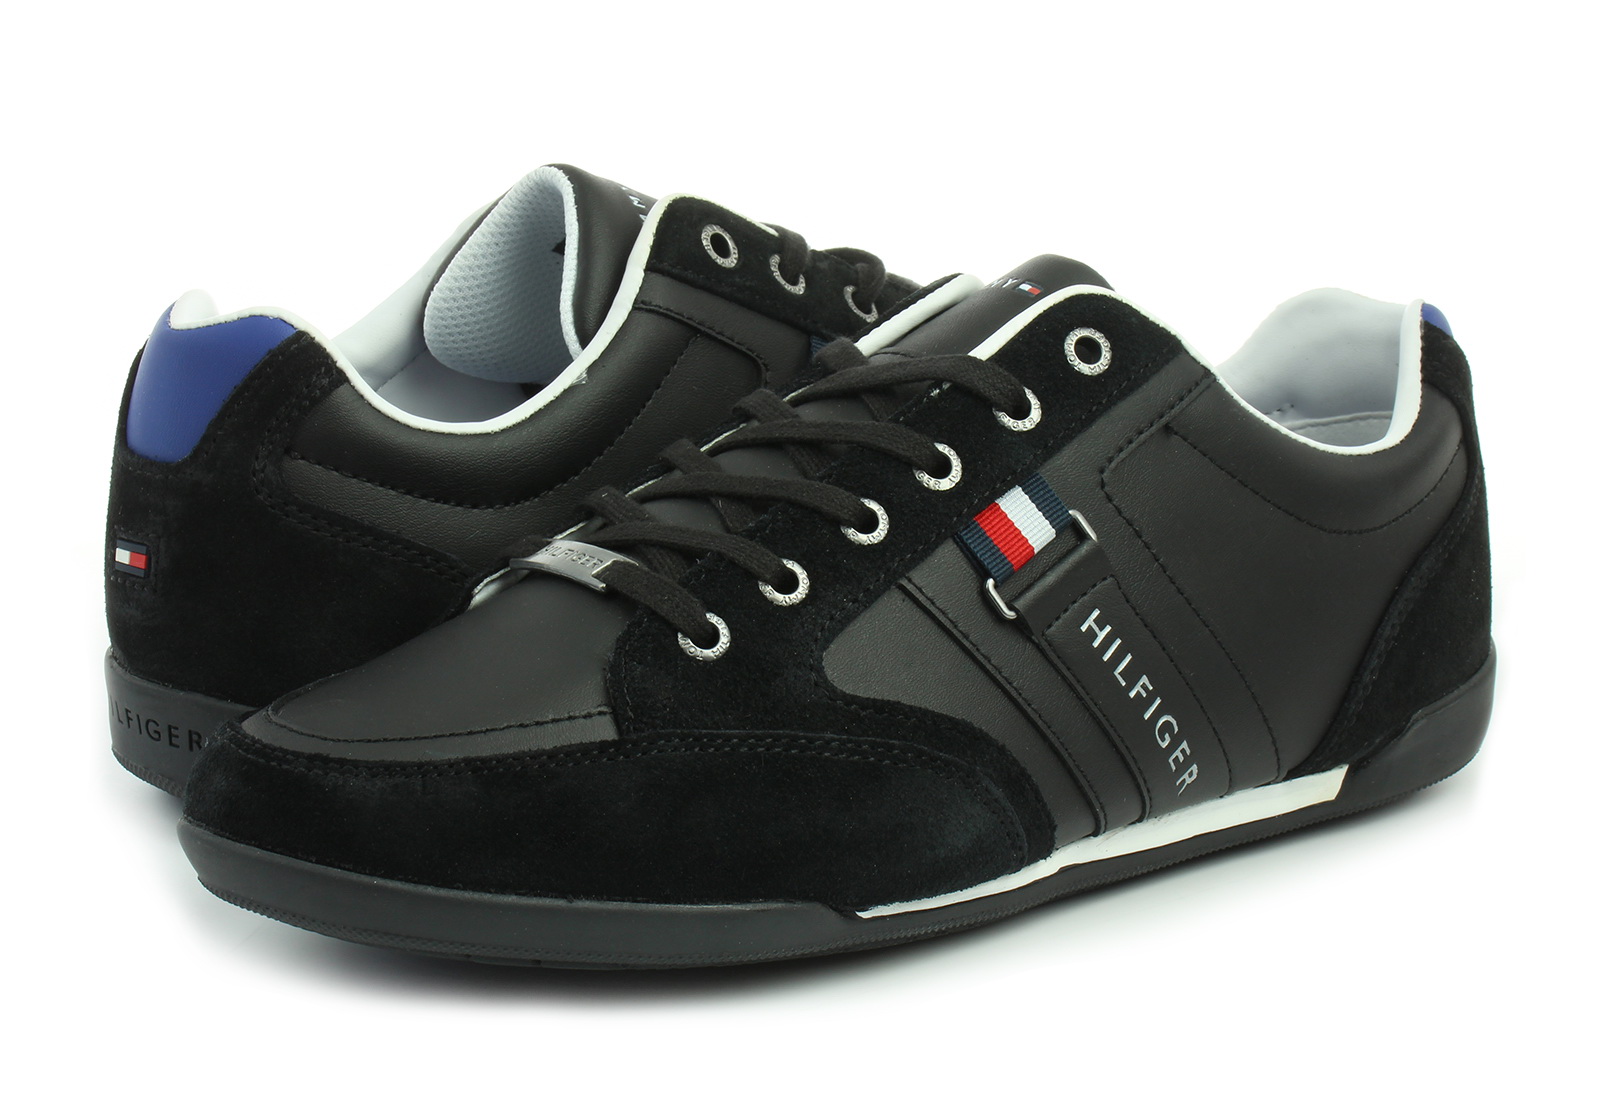 Tommy Hilfiger - Royal 7c - 19F-2398-990 - shop for sneakers, shoes and boots